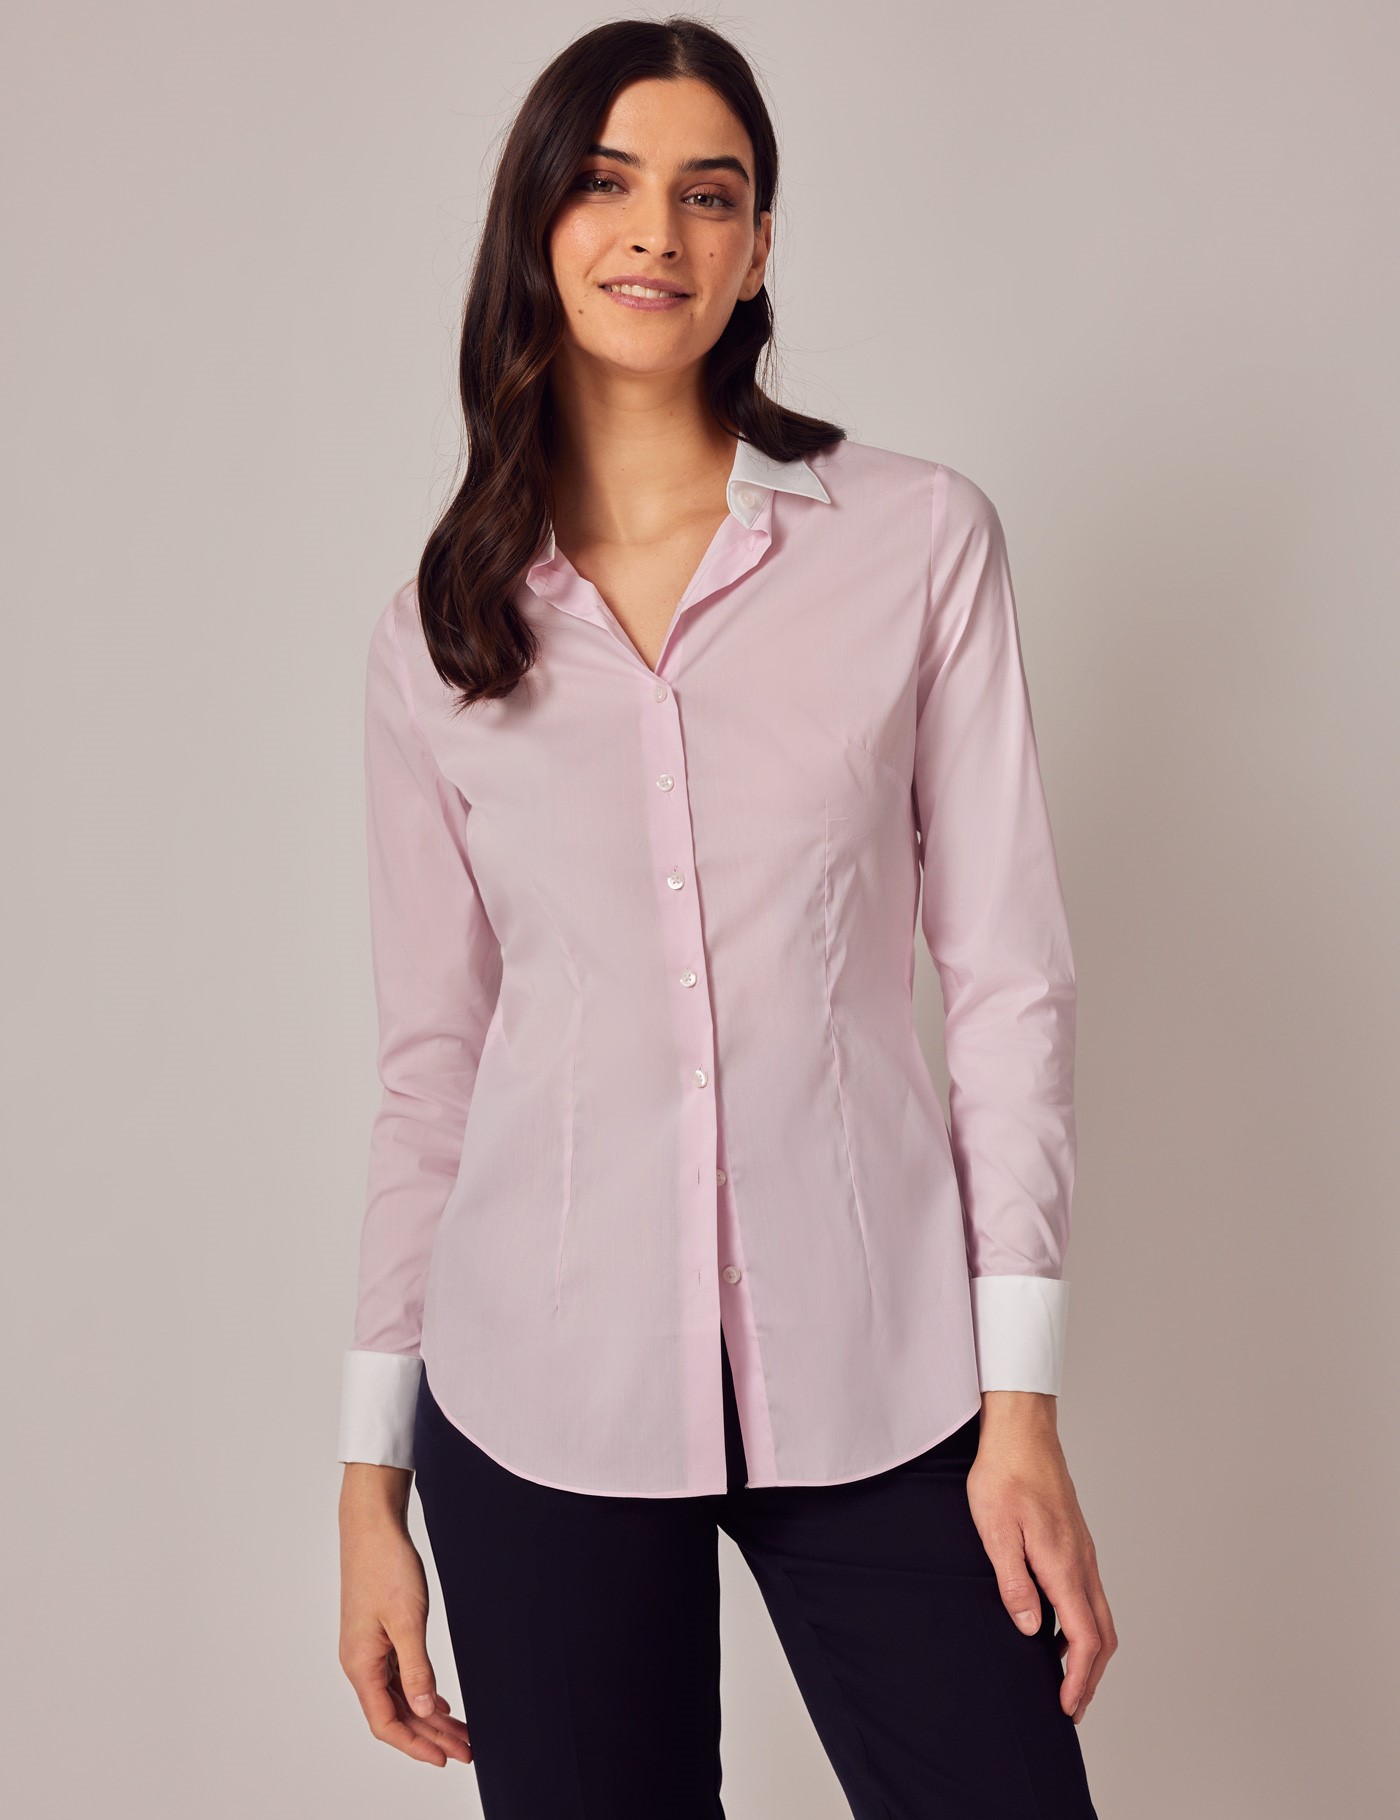 Women's Light Fitted Nylon Shirt With White Collar & Double | Hawes & Curtis